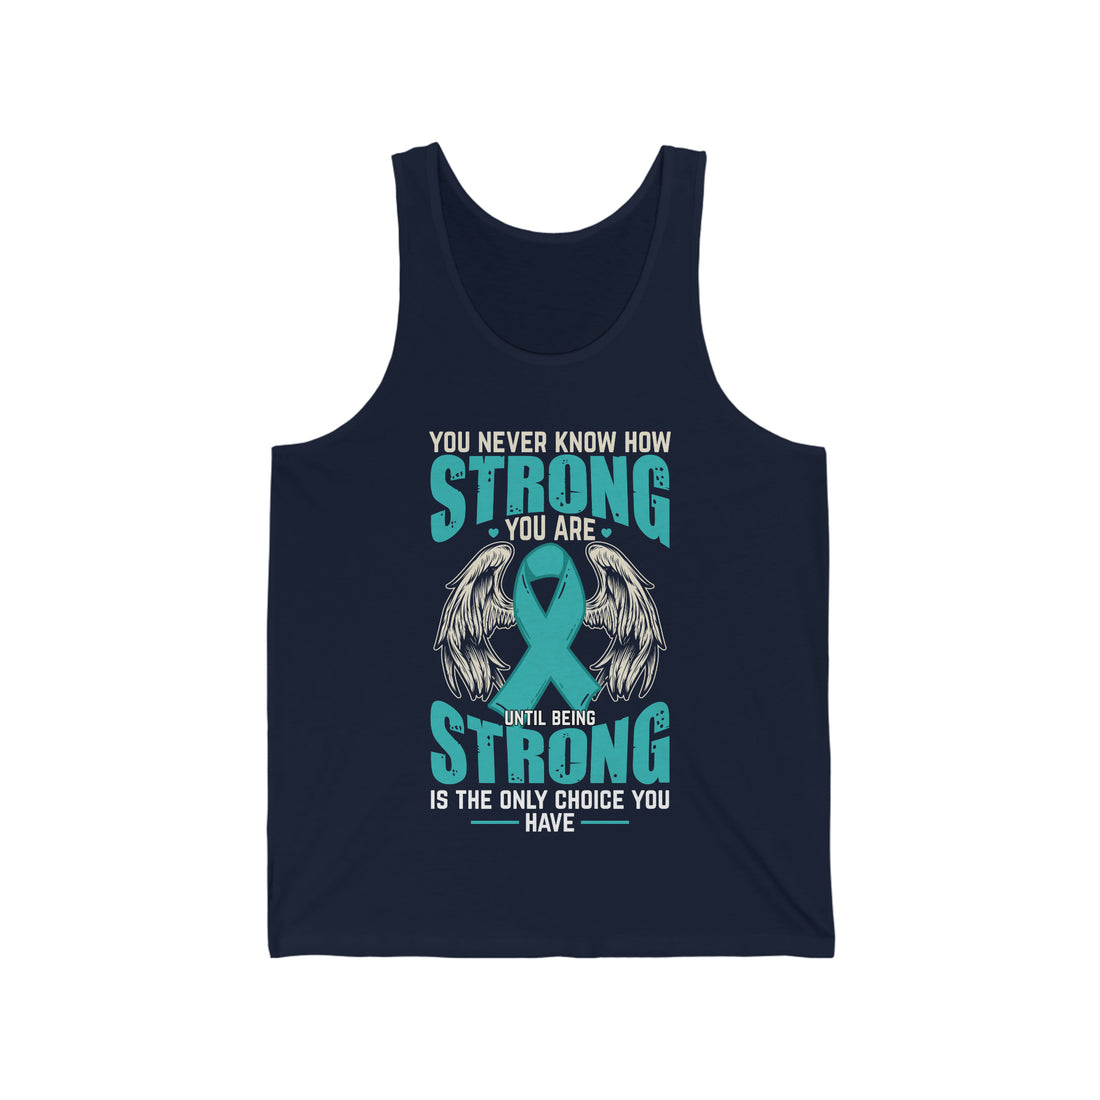 You Never Know How Strong You Are - Unisex Jersey Tank Top